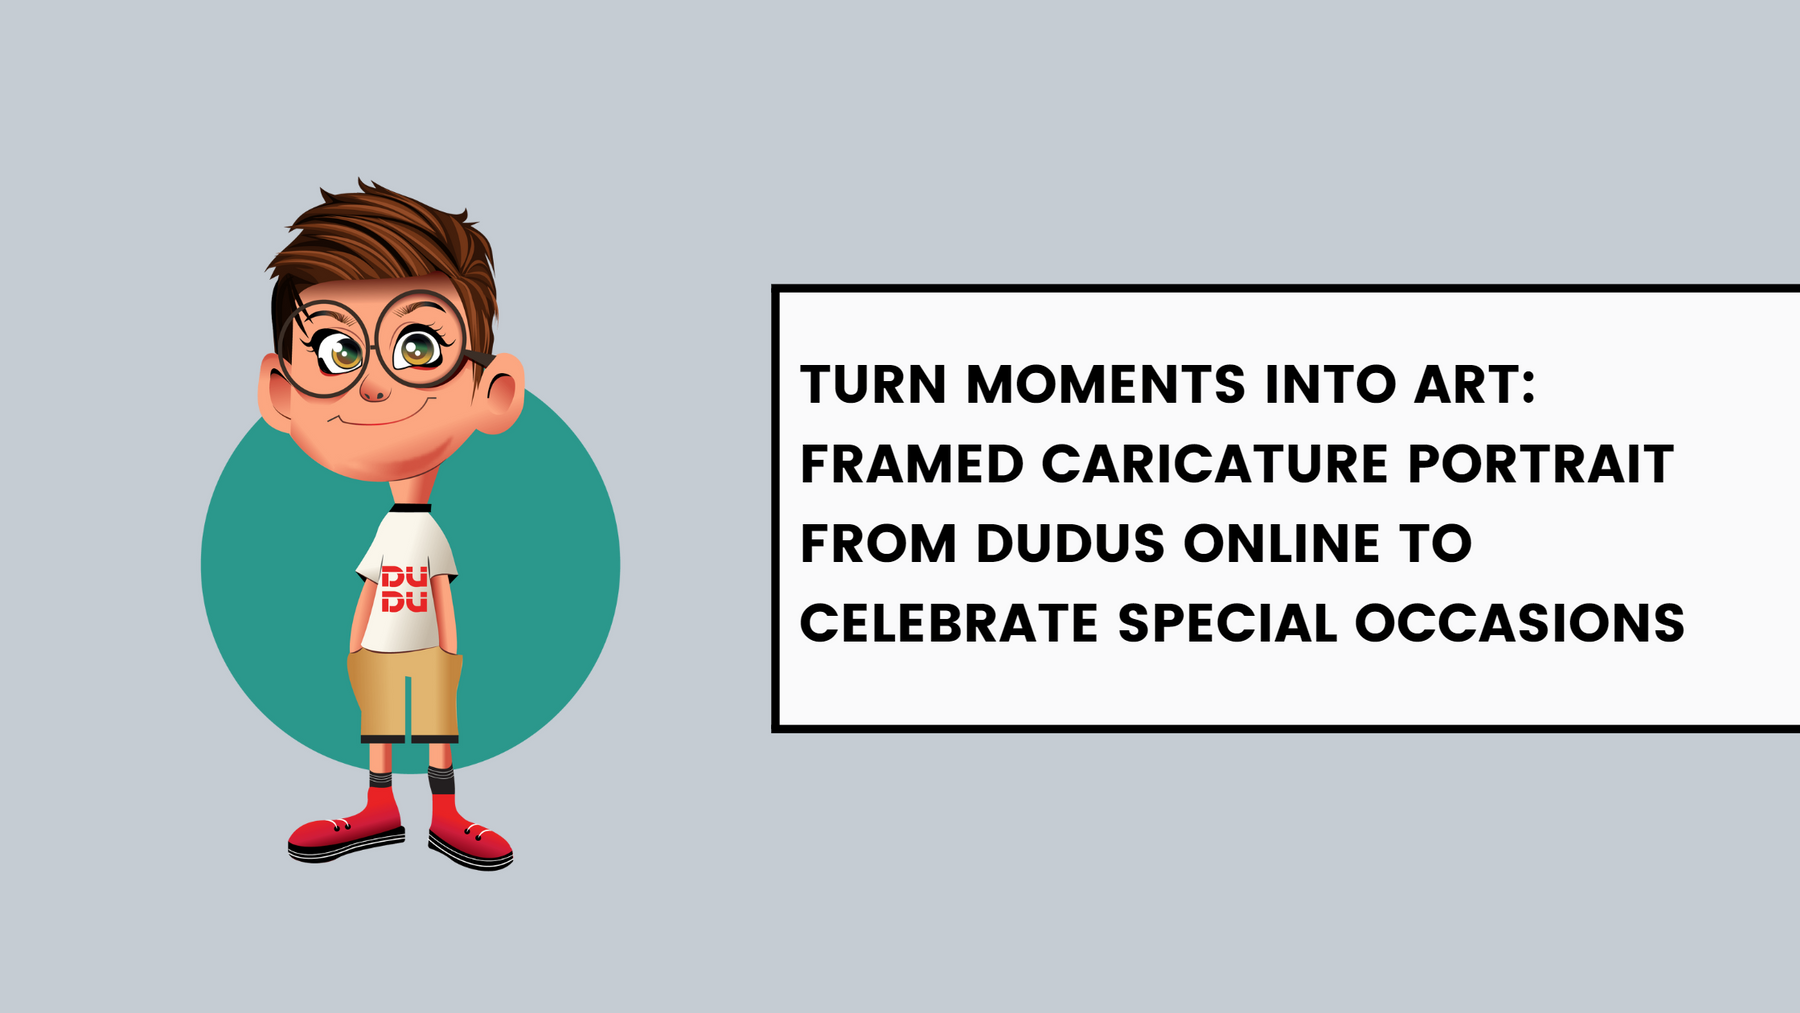 Turn Moments Into Art: Framed Caricature Portrait From Dudus Online To Celebrate Special Occasions